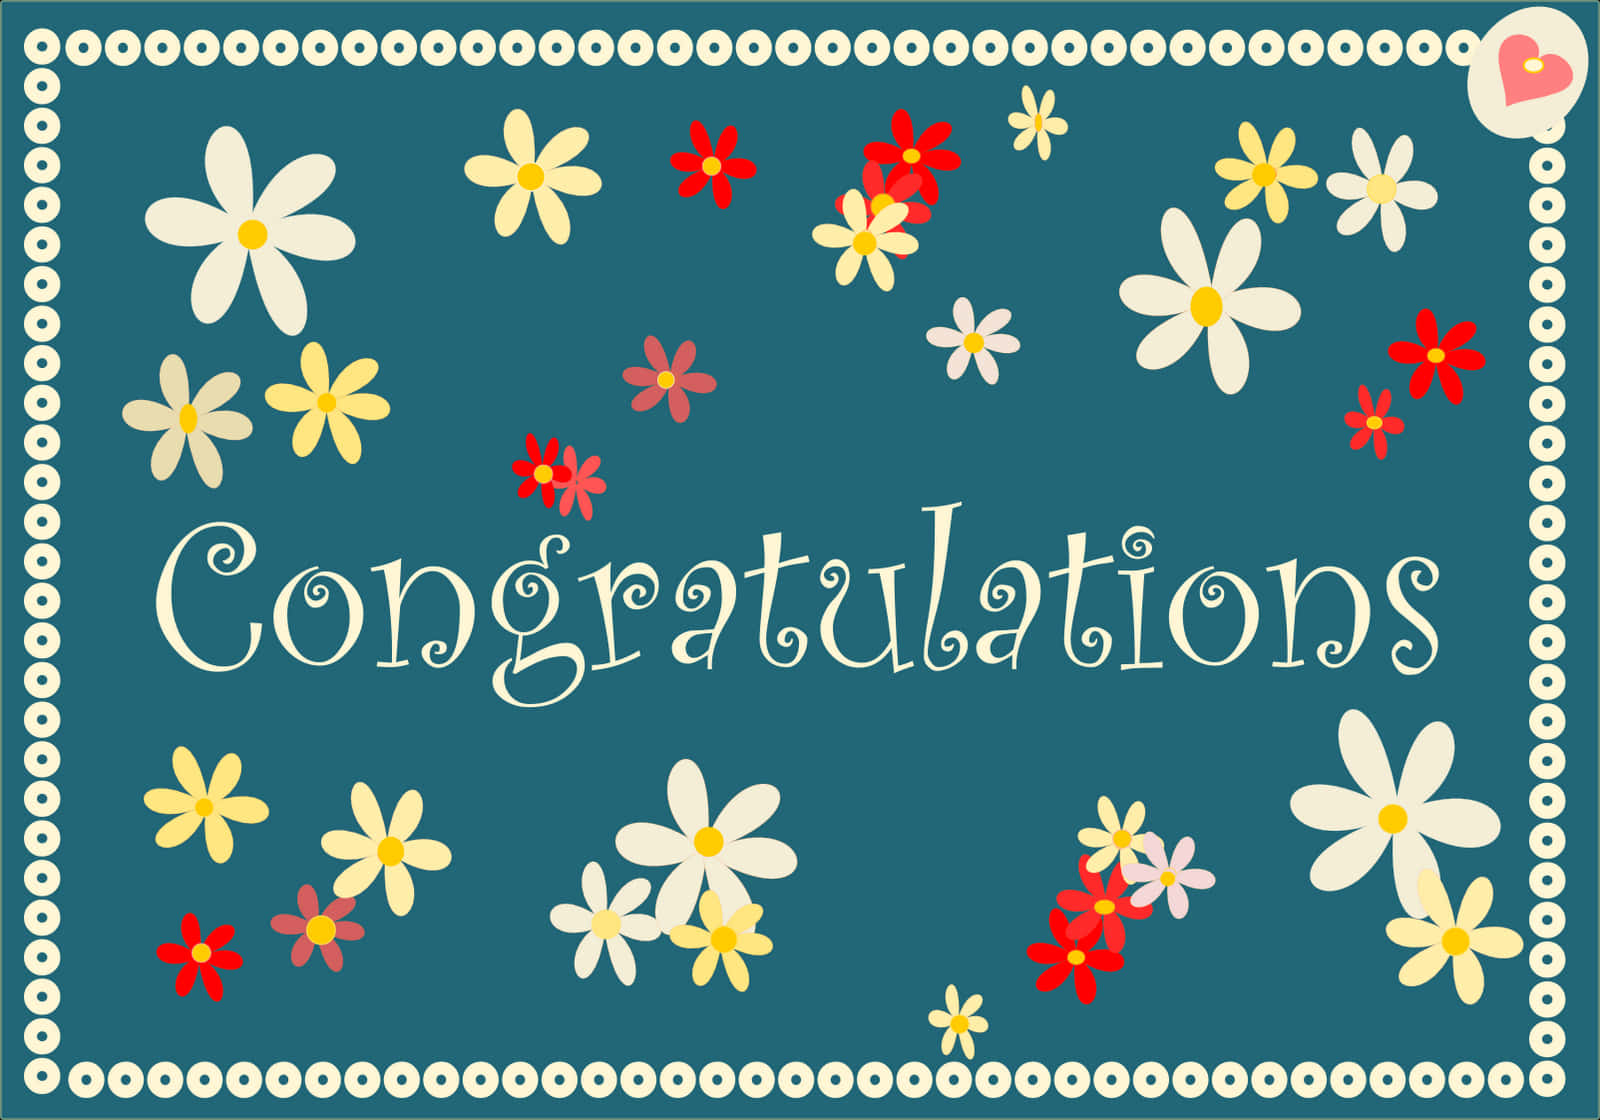 Congratulations Card With Flowers And A Heart